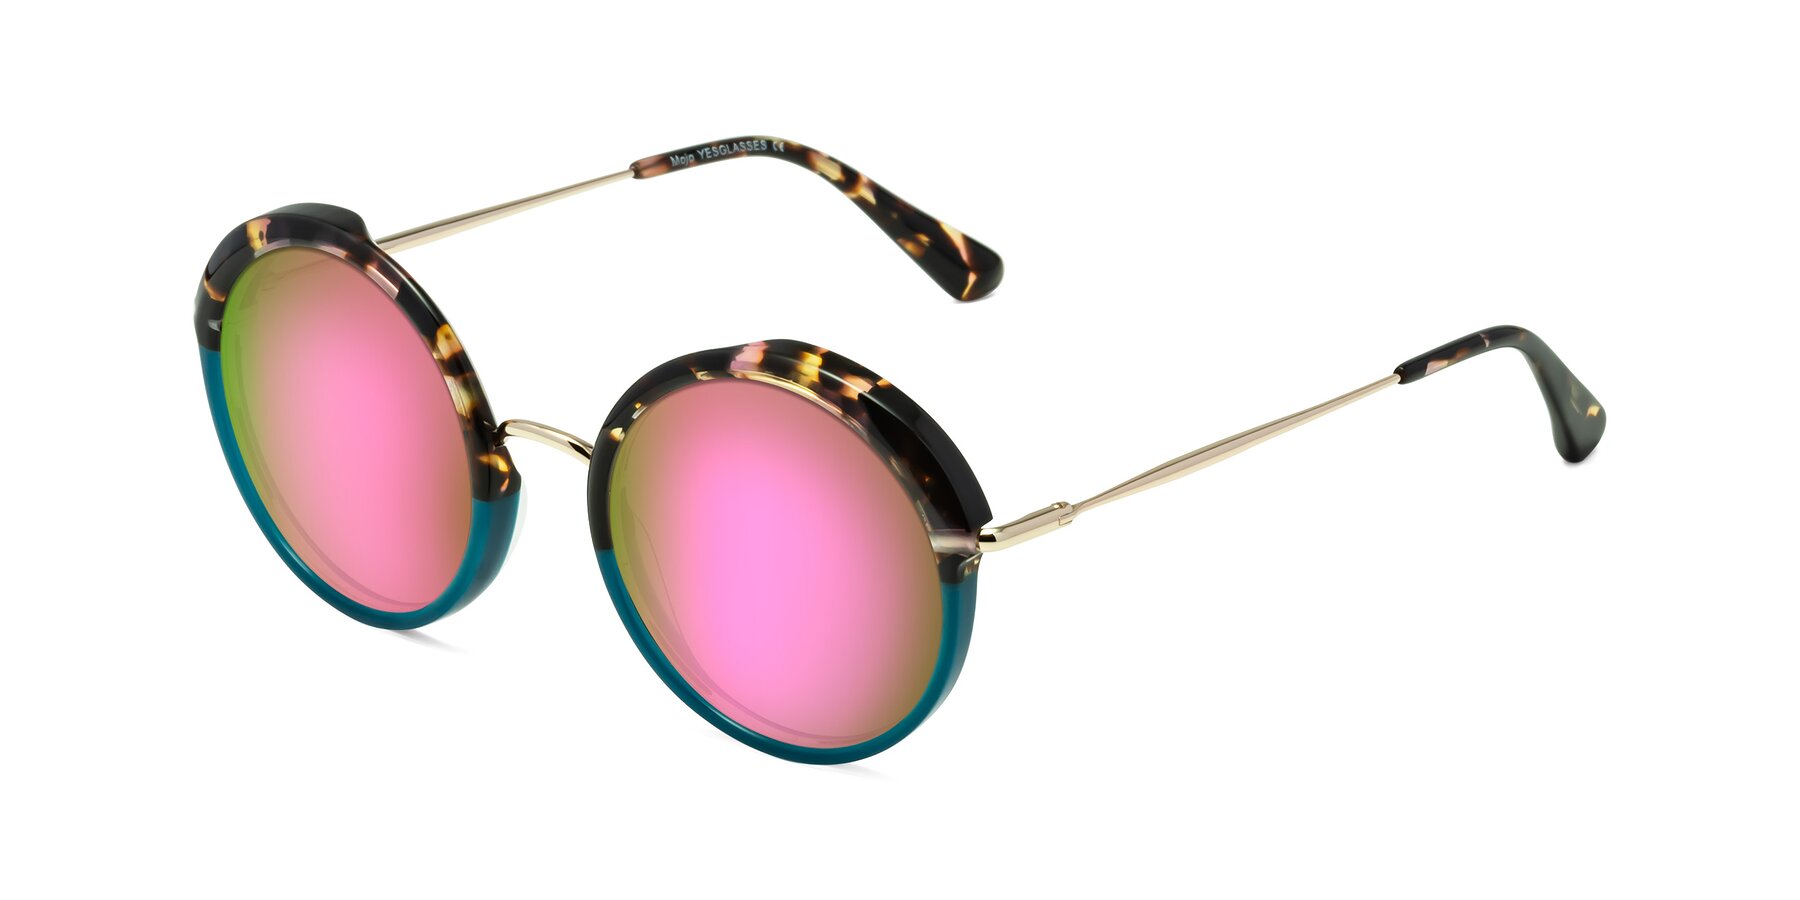 Angle of Mojo in Floral-Teal with Pink Mirrored Lenses